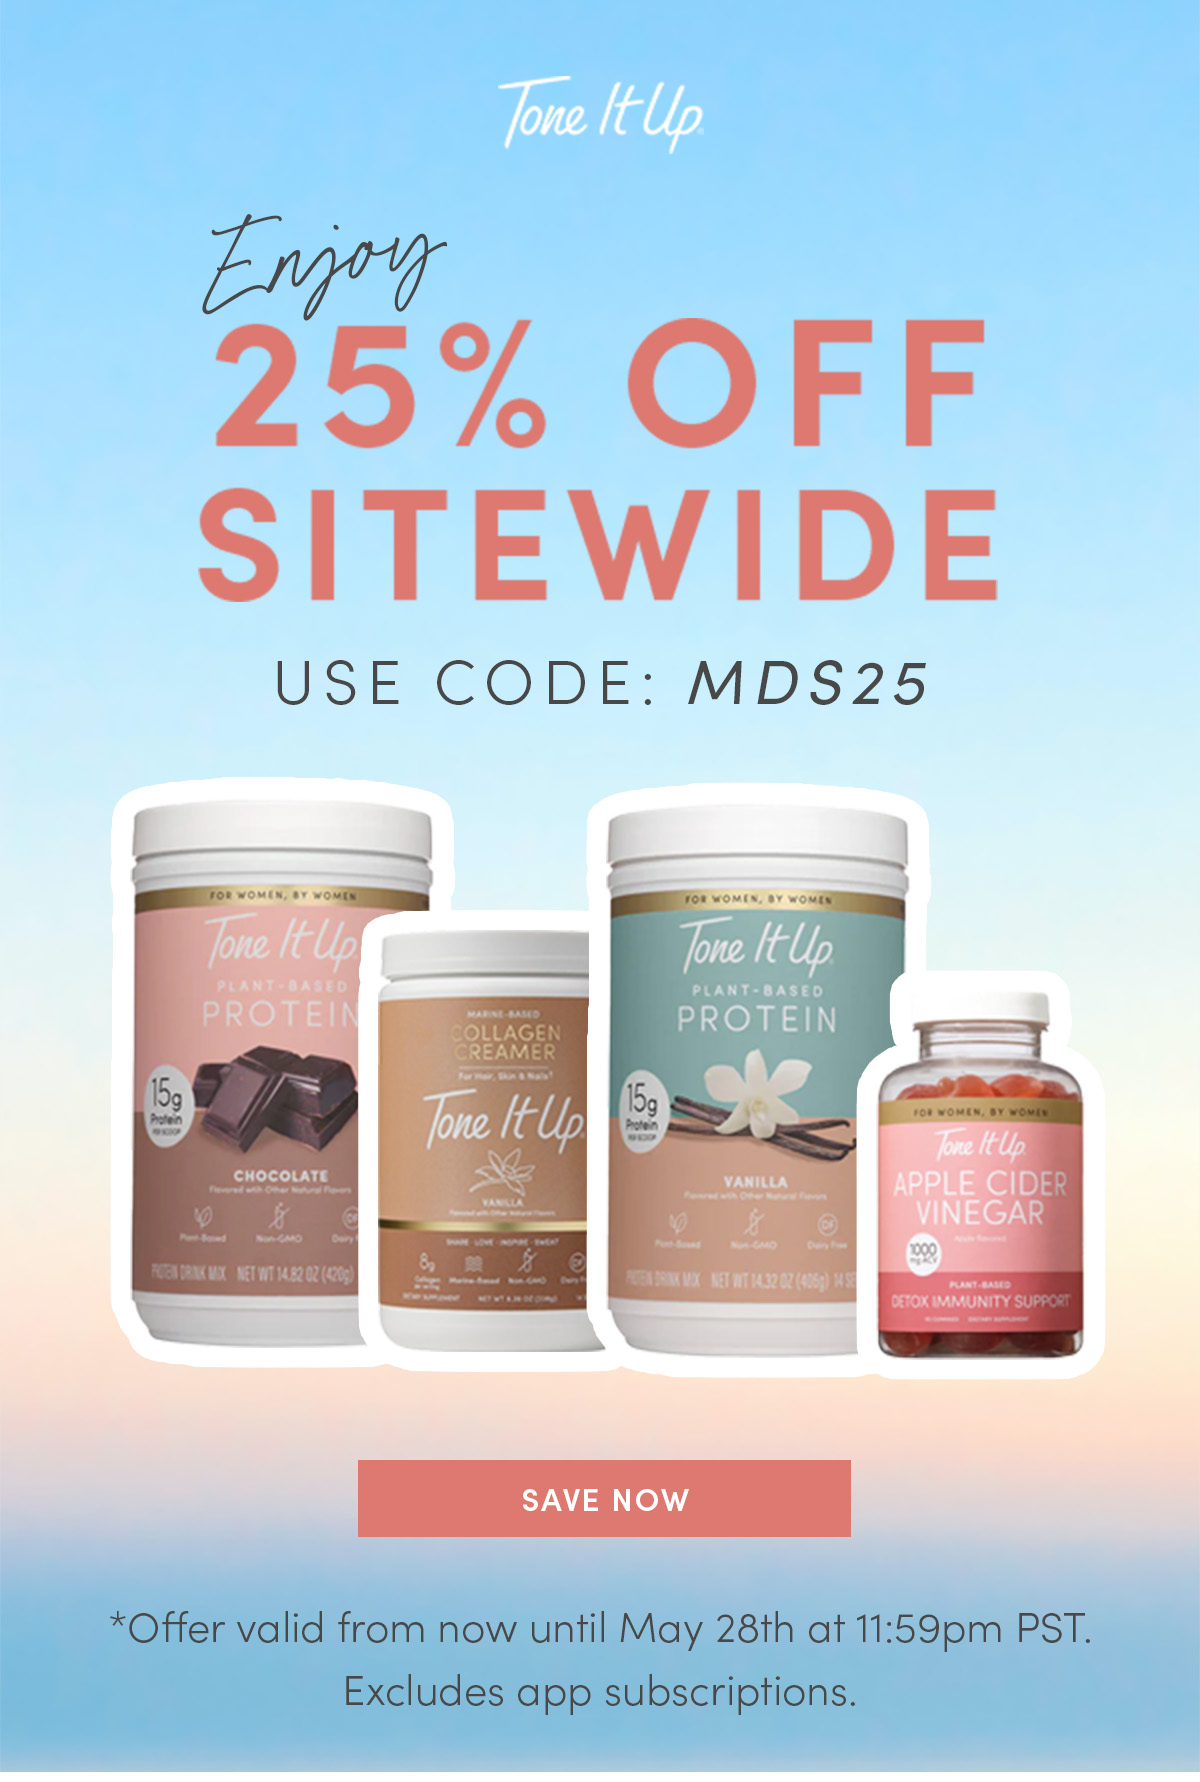 Enjoy 25% OFF Sitewide with code MDS25